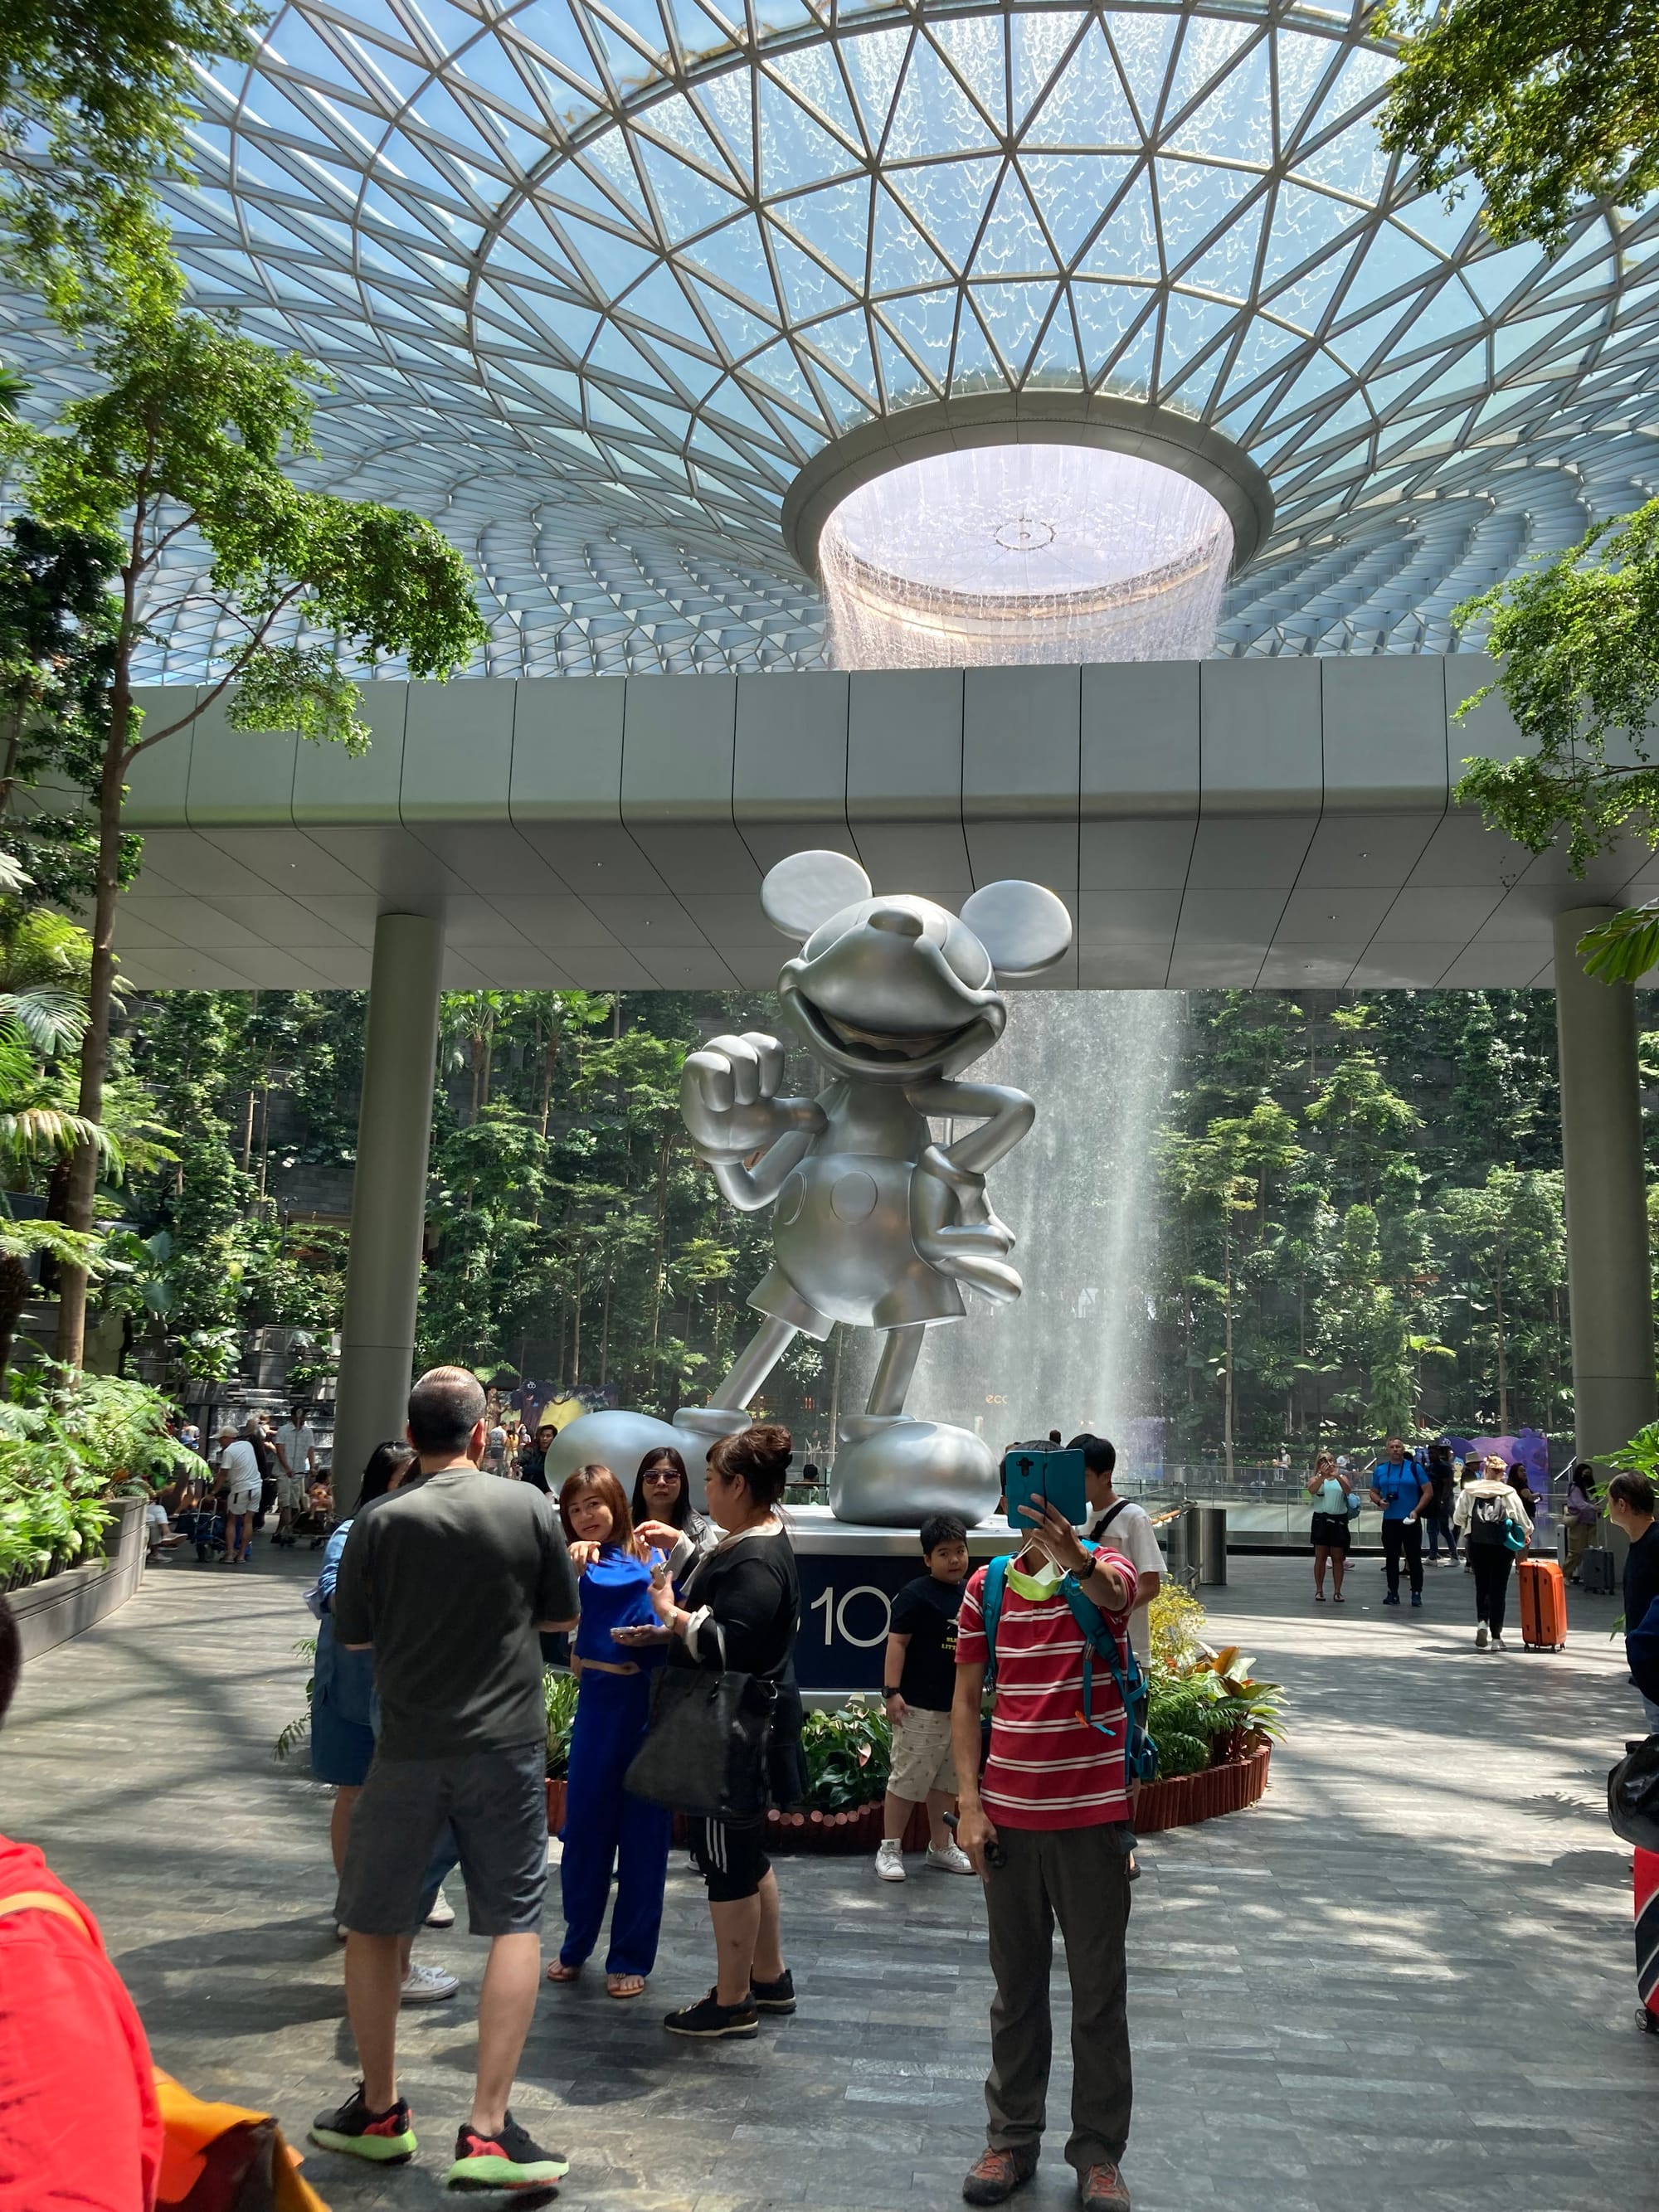 Visitors pose for a photo before a platinum Mickey Mouse statue. The indoor waterfall is in the background.